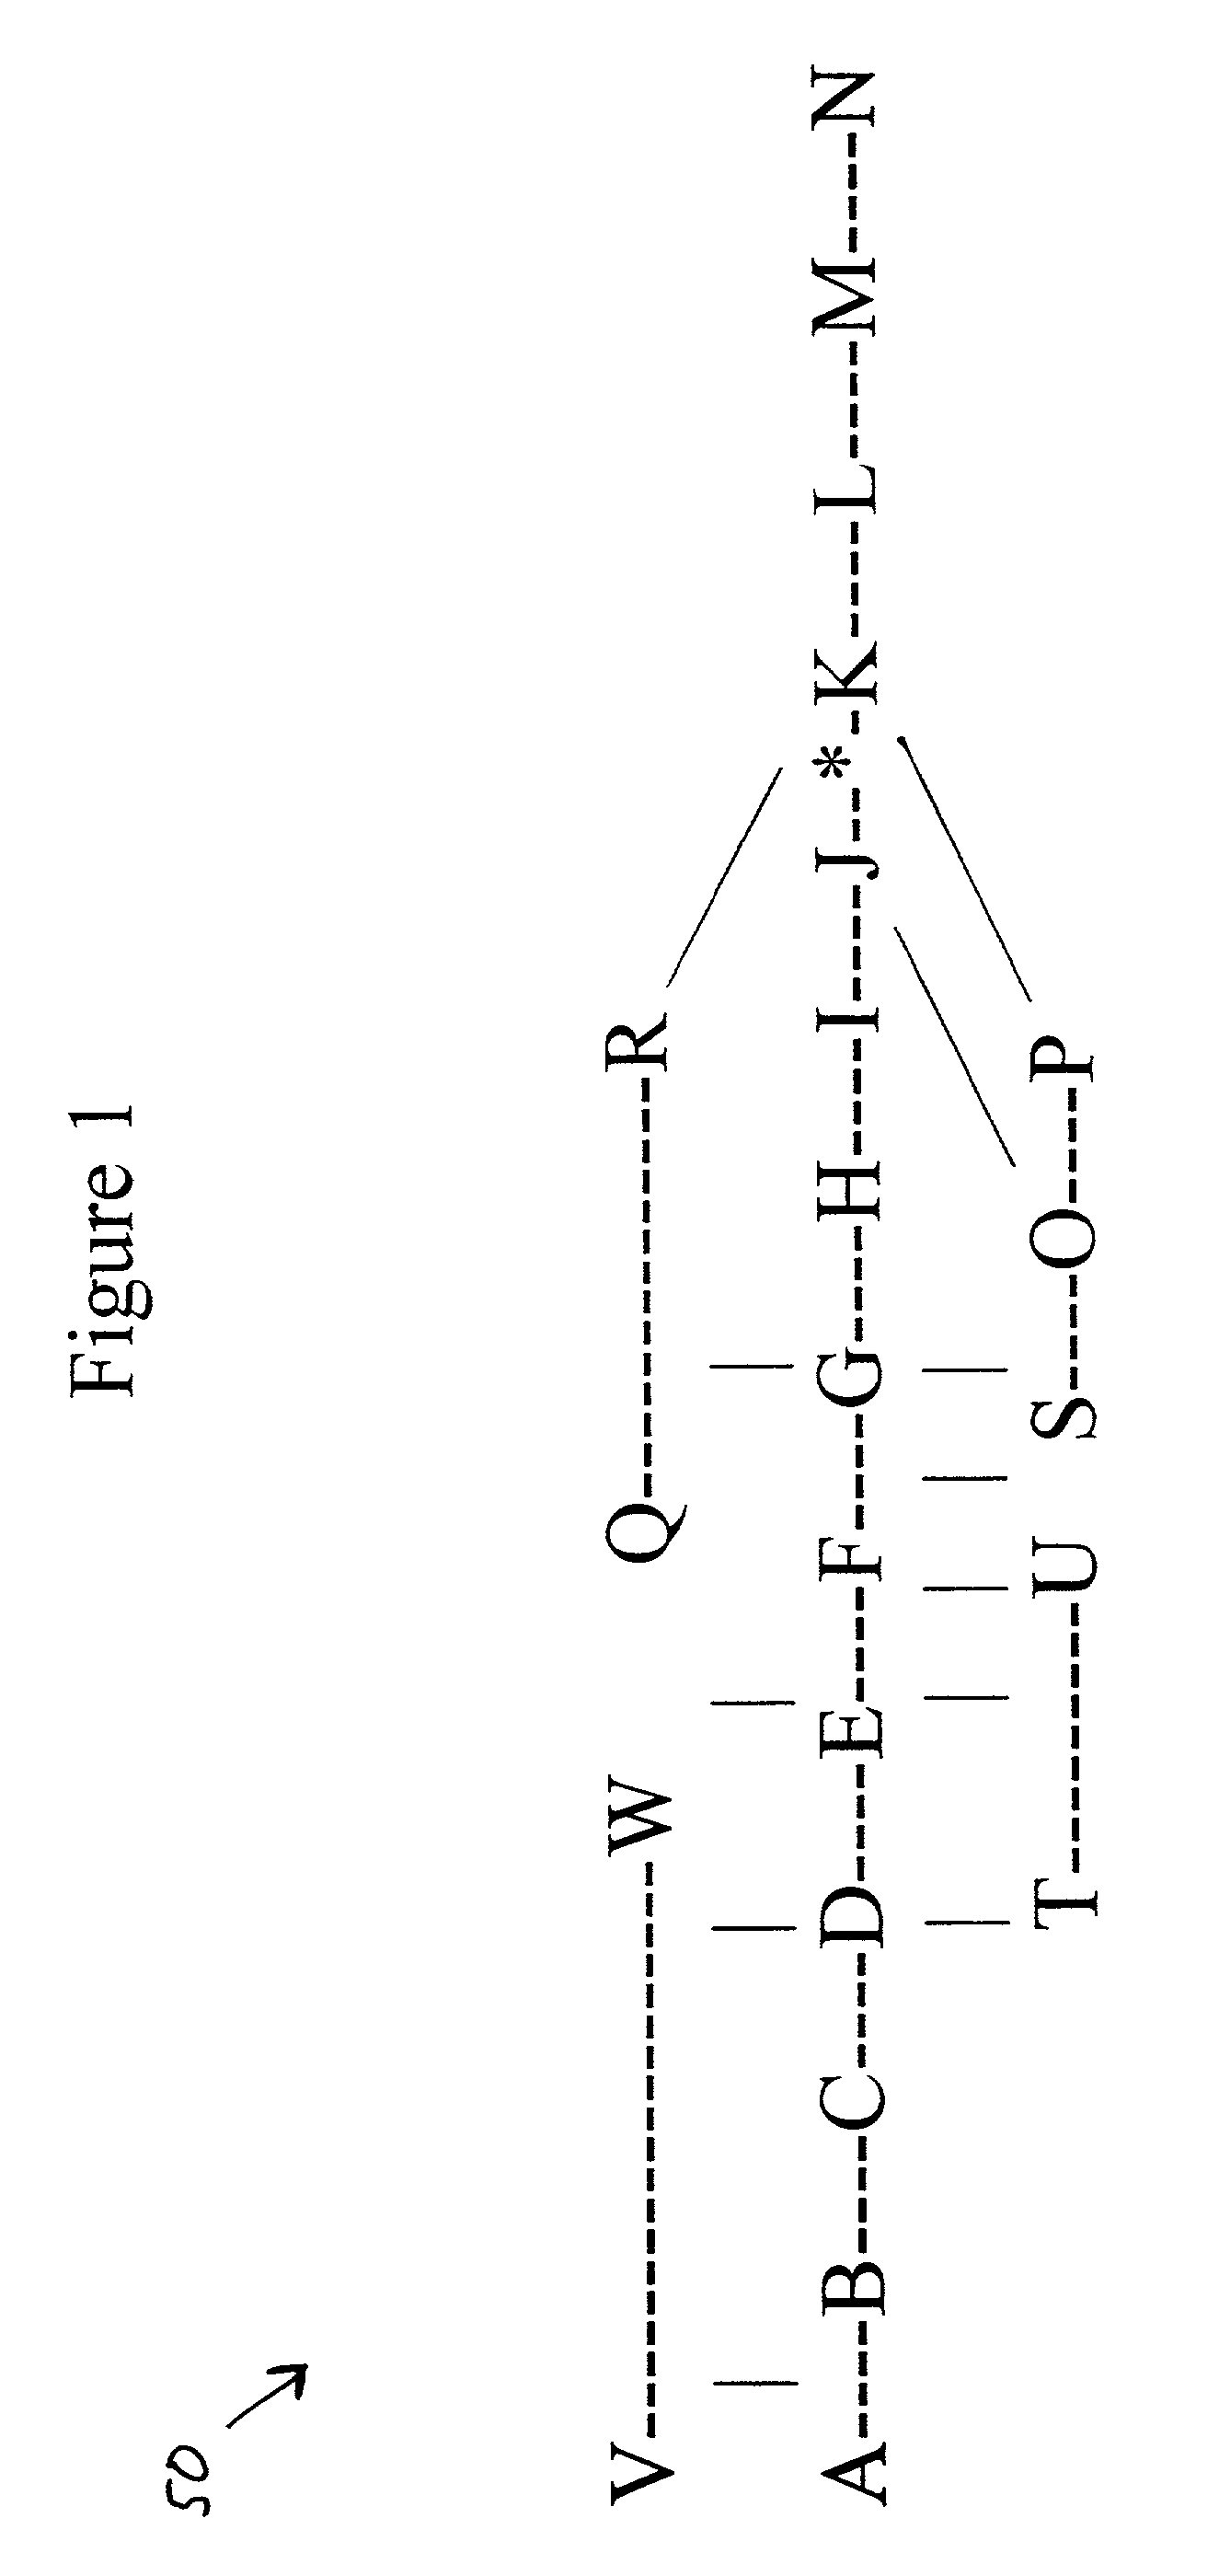 Restoration scheme for mesh-based switching networks